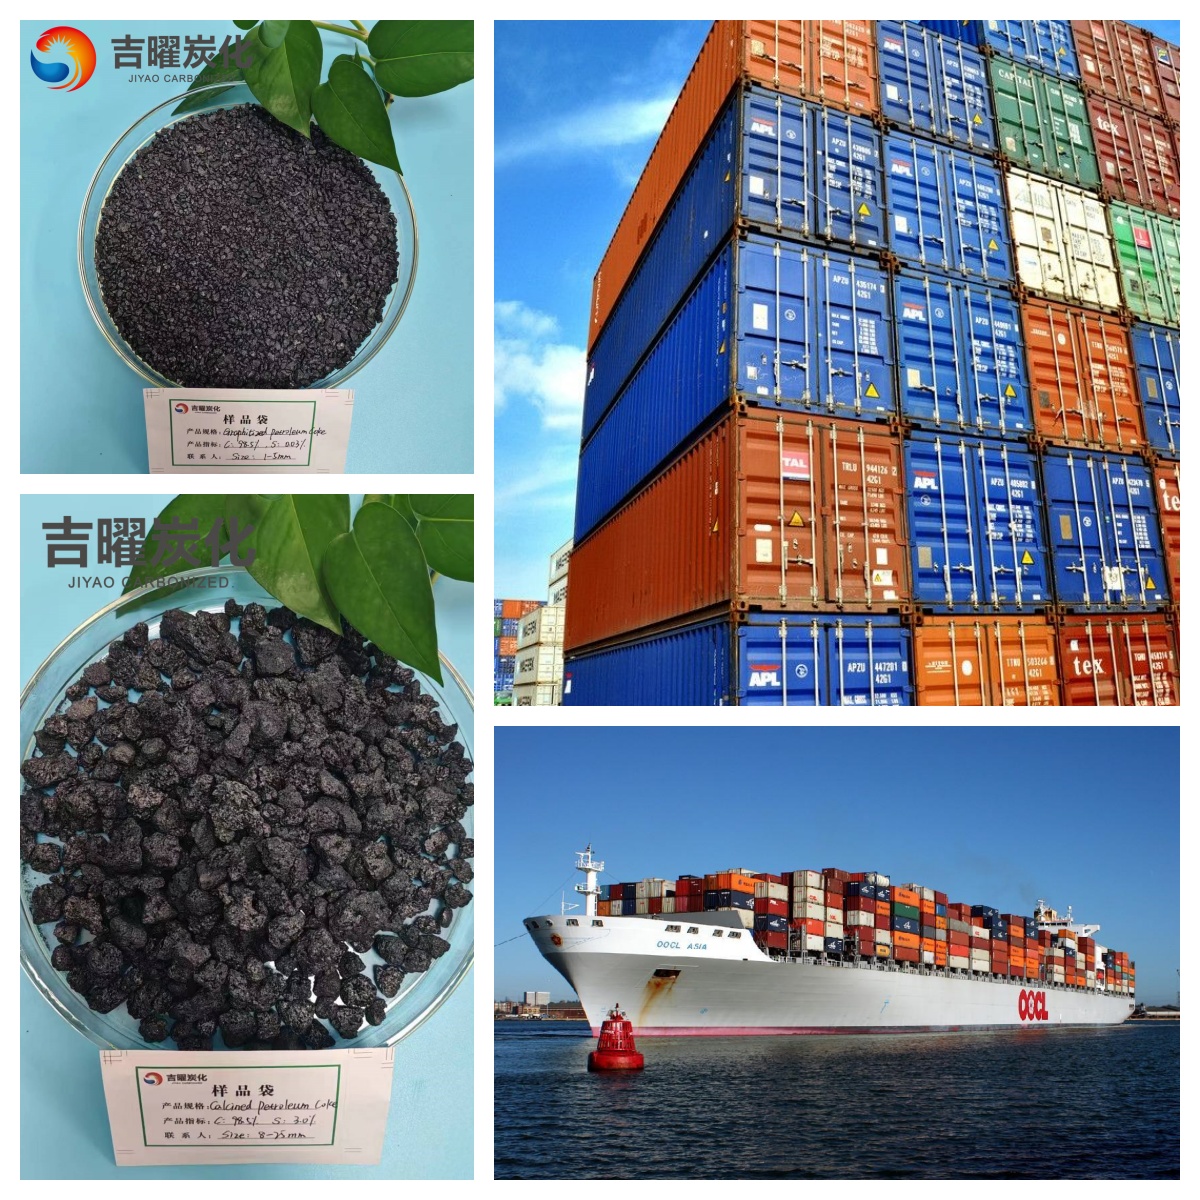 How Should Foreign Trade Enterprises Respond to the Recent Surge in Ocean Freight Rates?